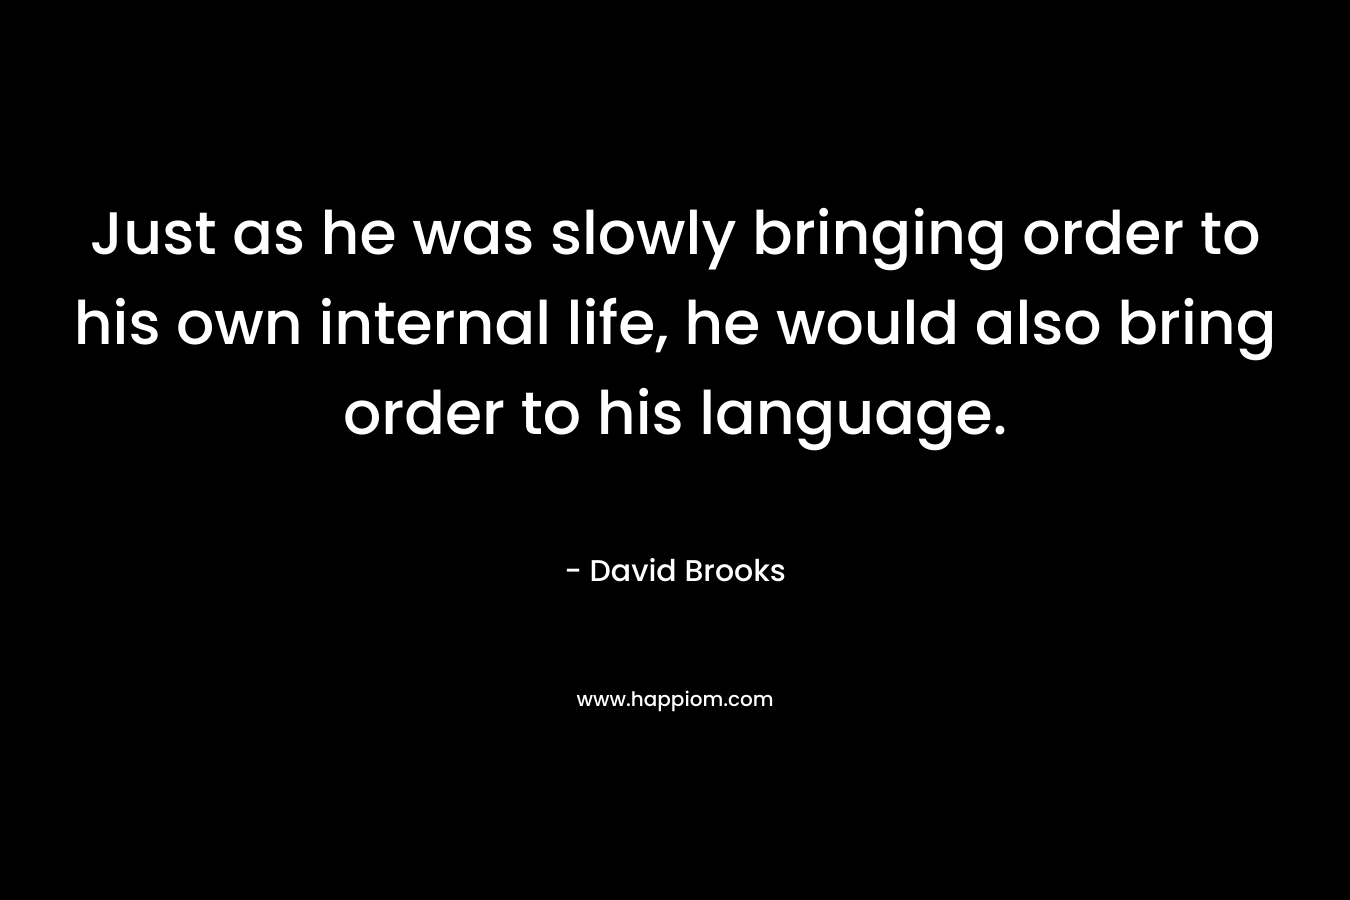 Just as he was slowly bringing order to his own internal life, he would also bring order to his language.